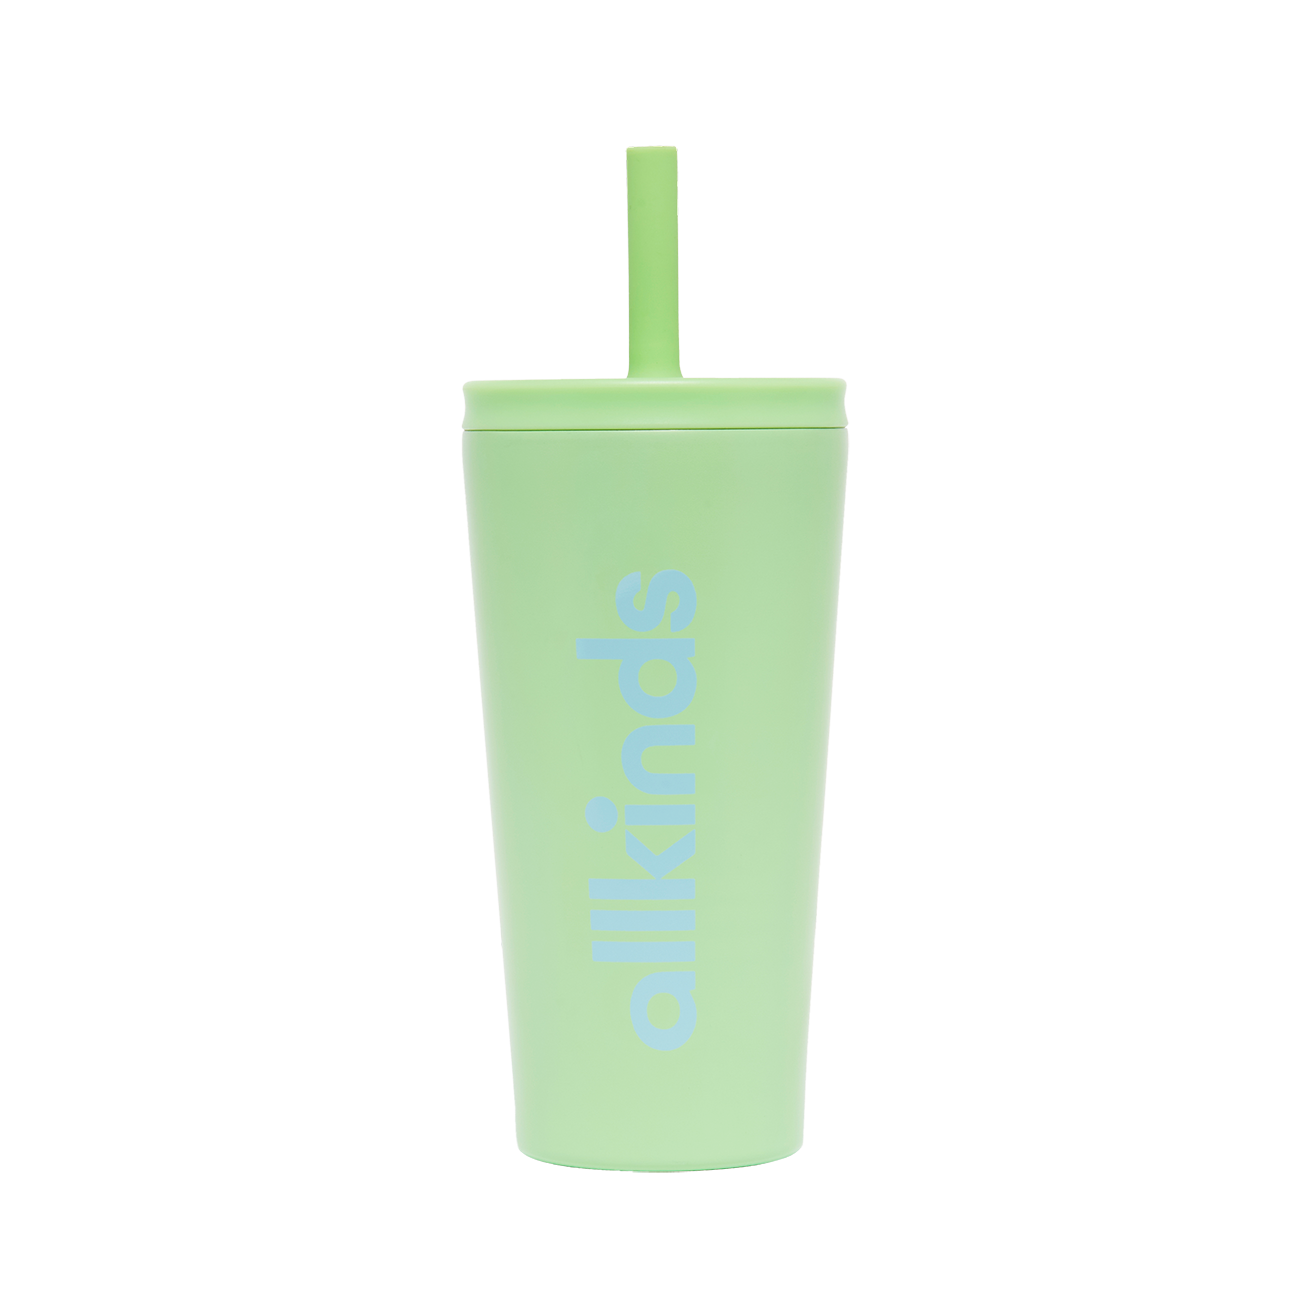 Ted Baker reusable smoothie cup with reusable sinless steel straw